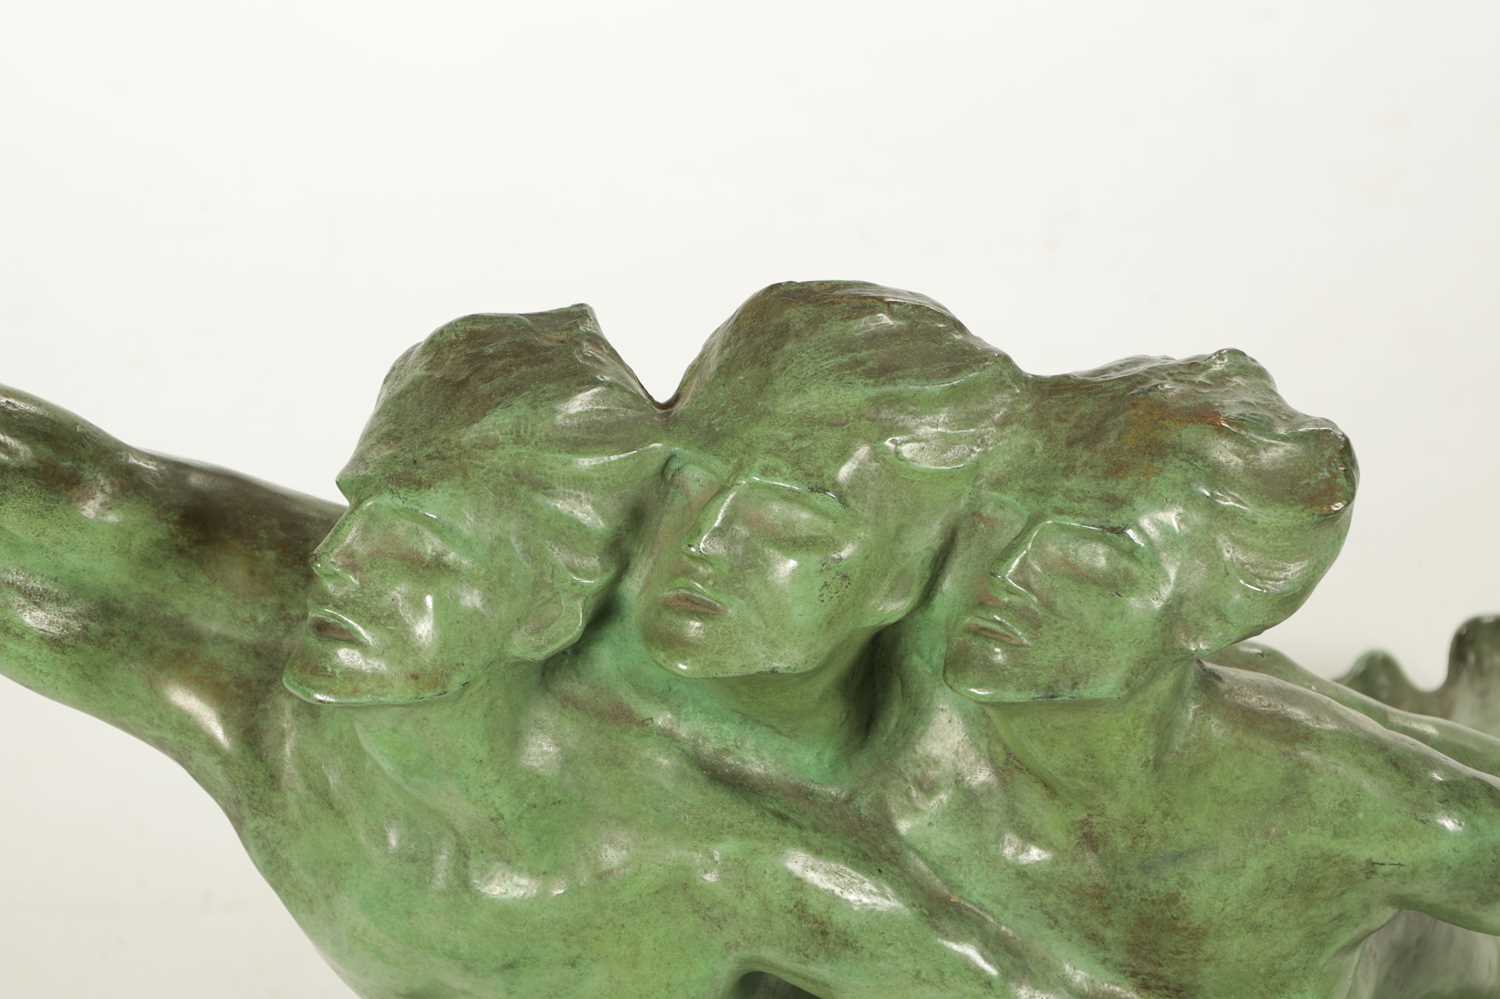 EUGENE CANNEEL (BELGIAN, BORN 1882). AN EARLY 20TH CENTURY PATINATED GREEN BRONZE SCULPTURE - Image 2 of 5